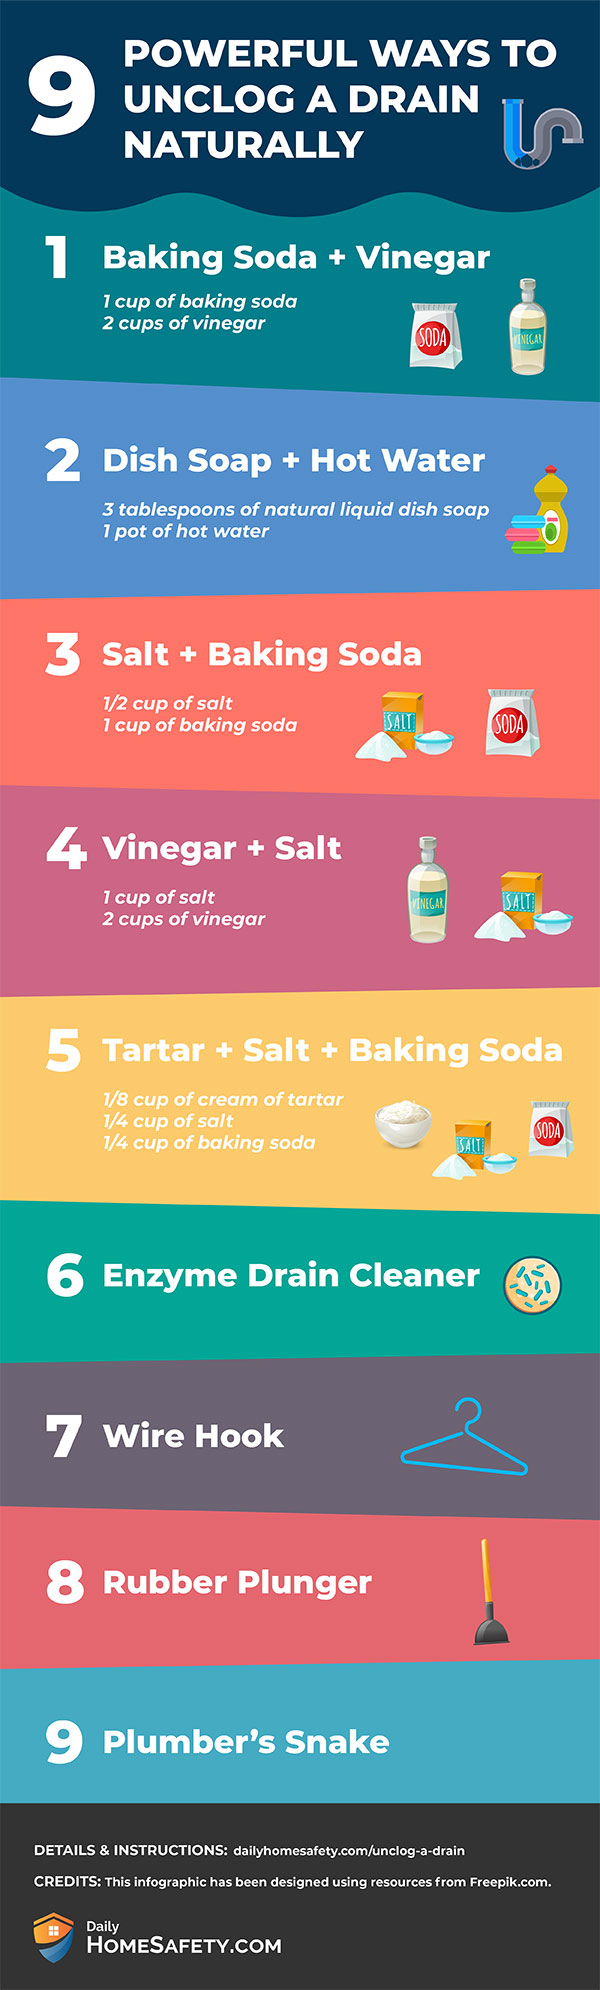 unclog a drain naturally infographic